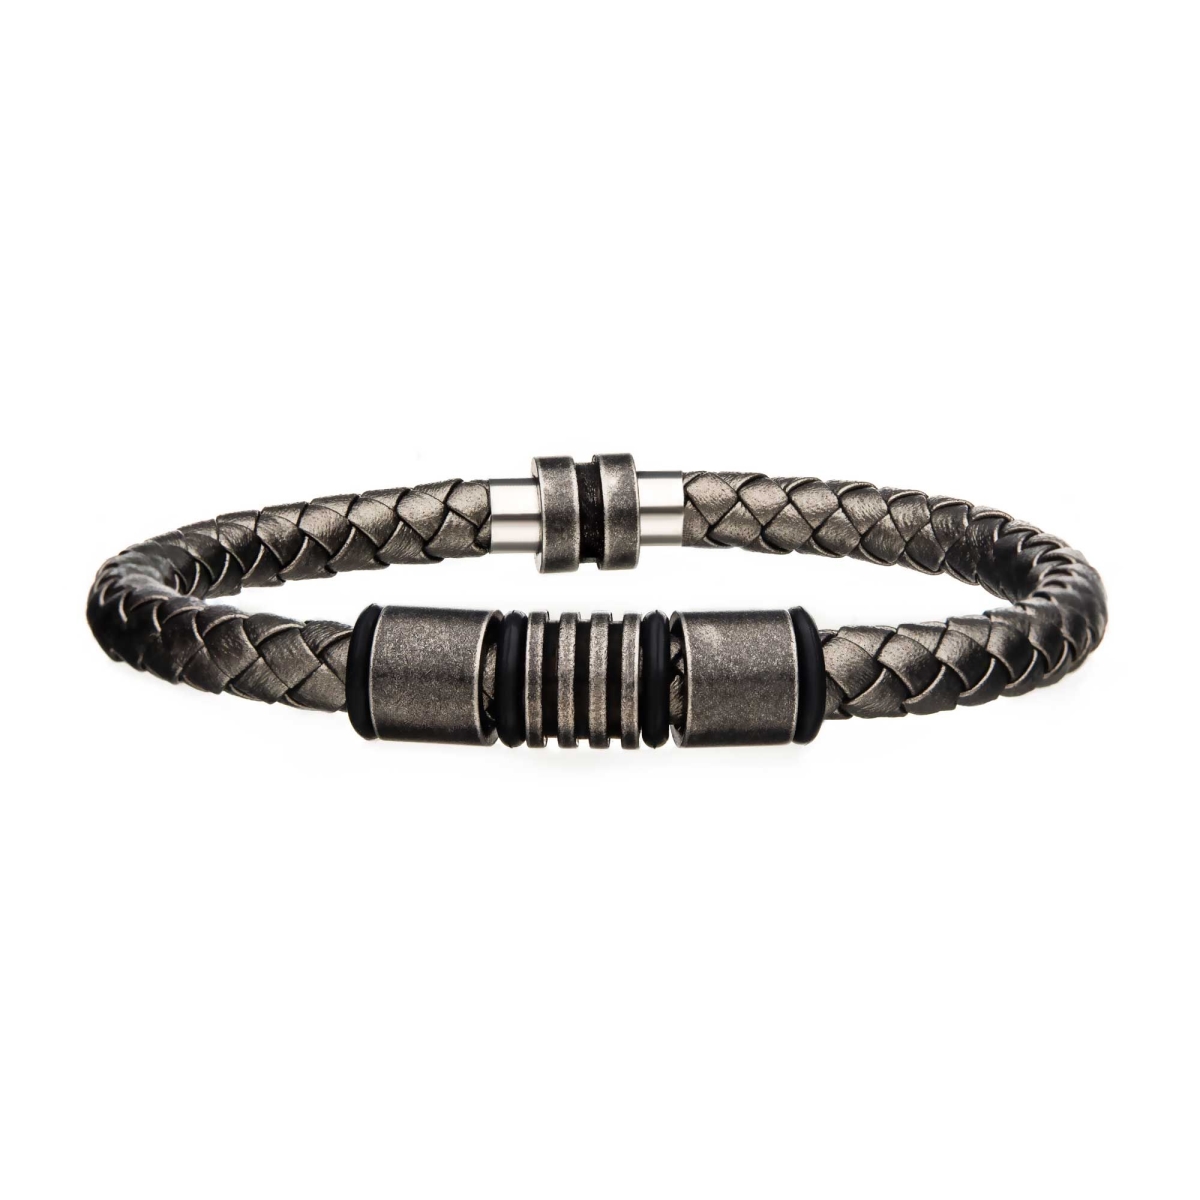 Br27572 8.25 In. Mens Grey Braided Leather Antique Beads Bracelet